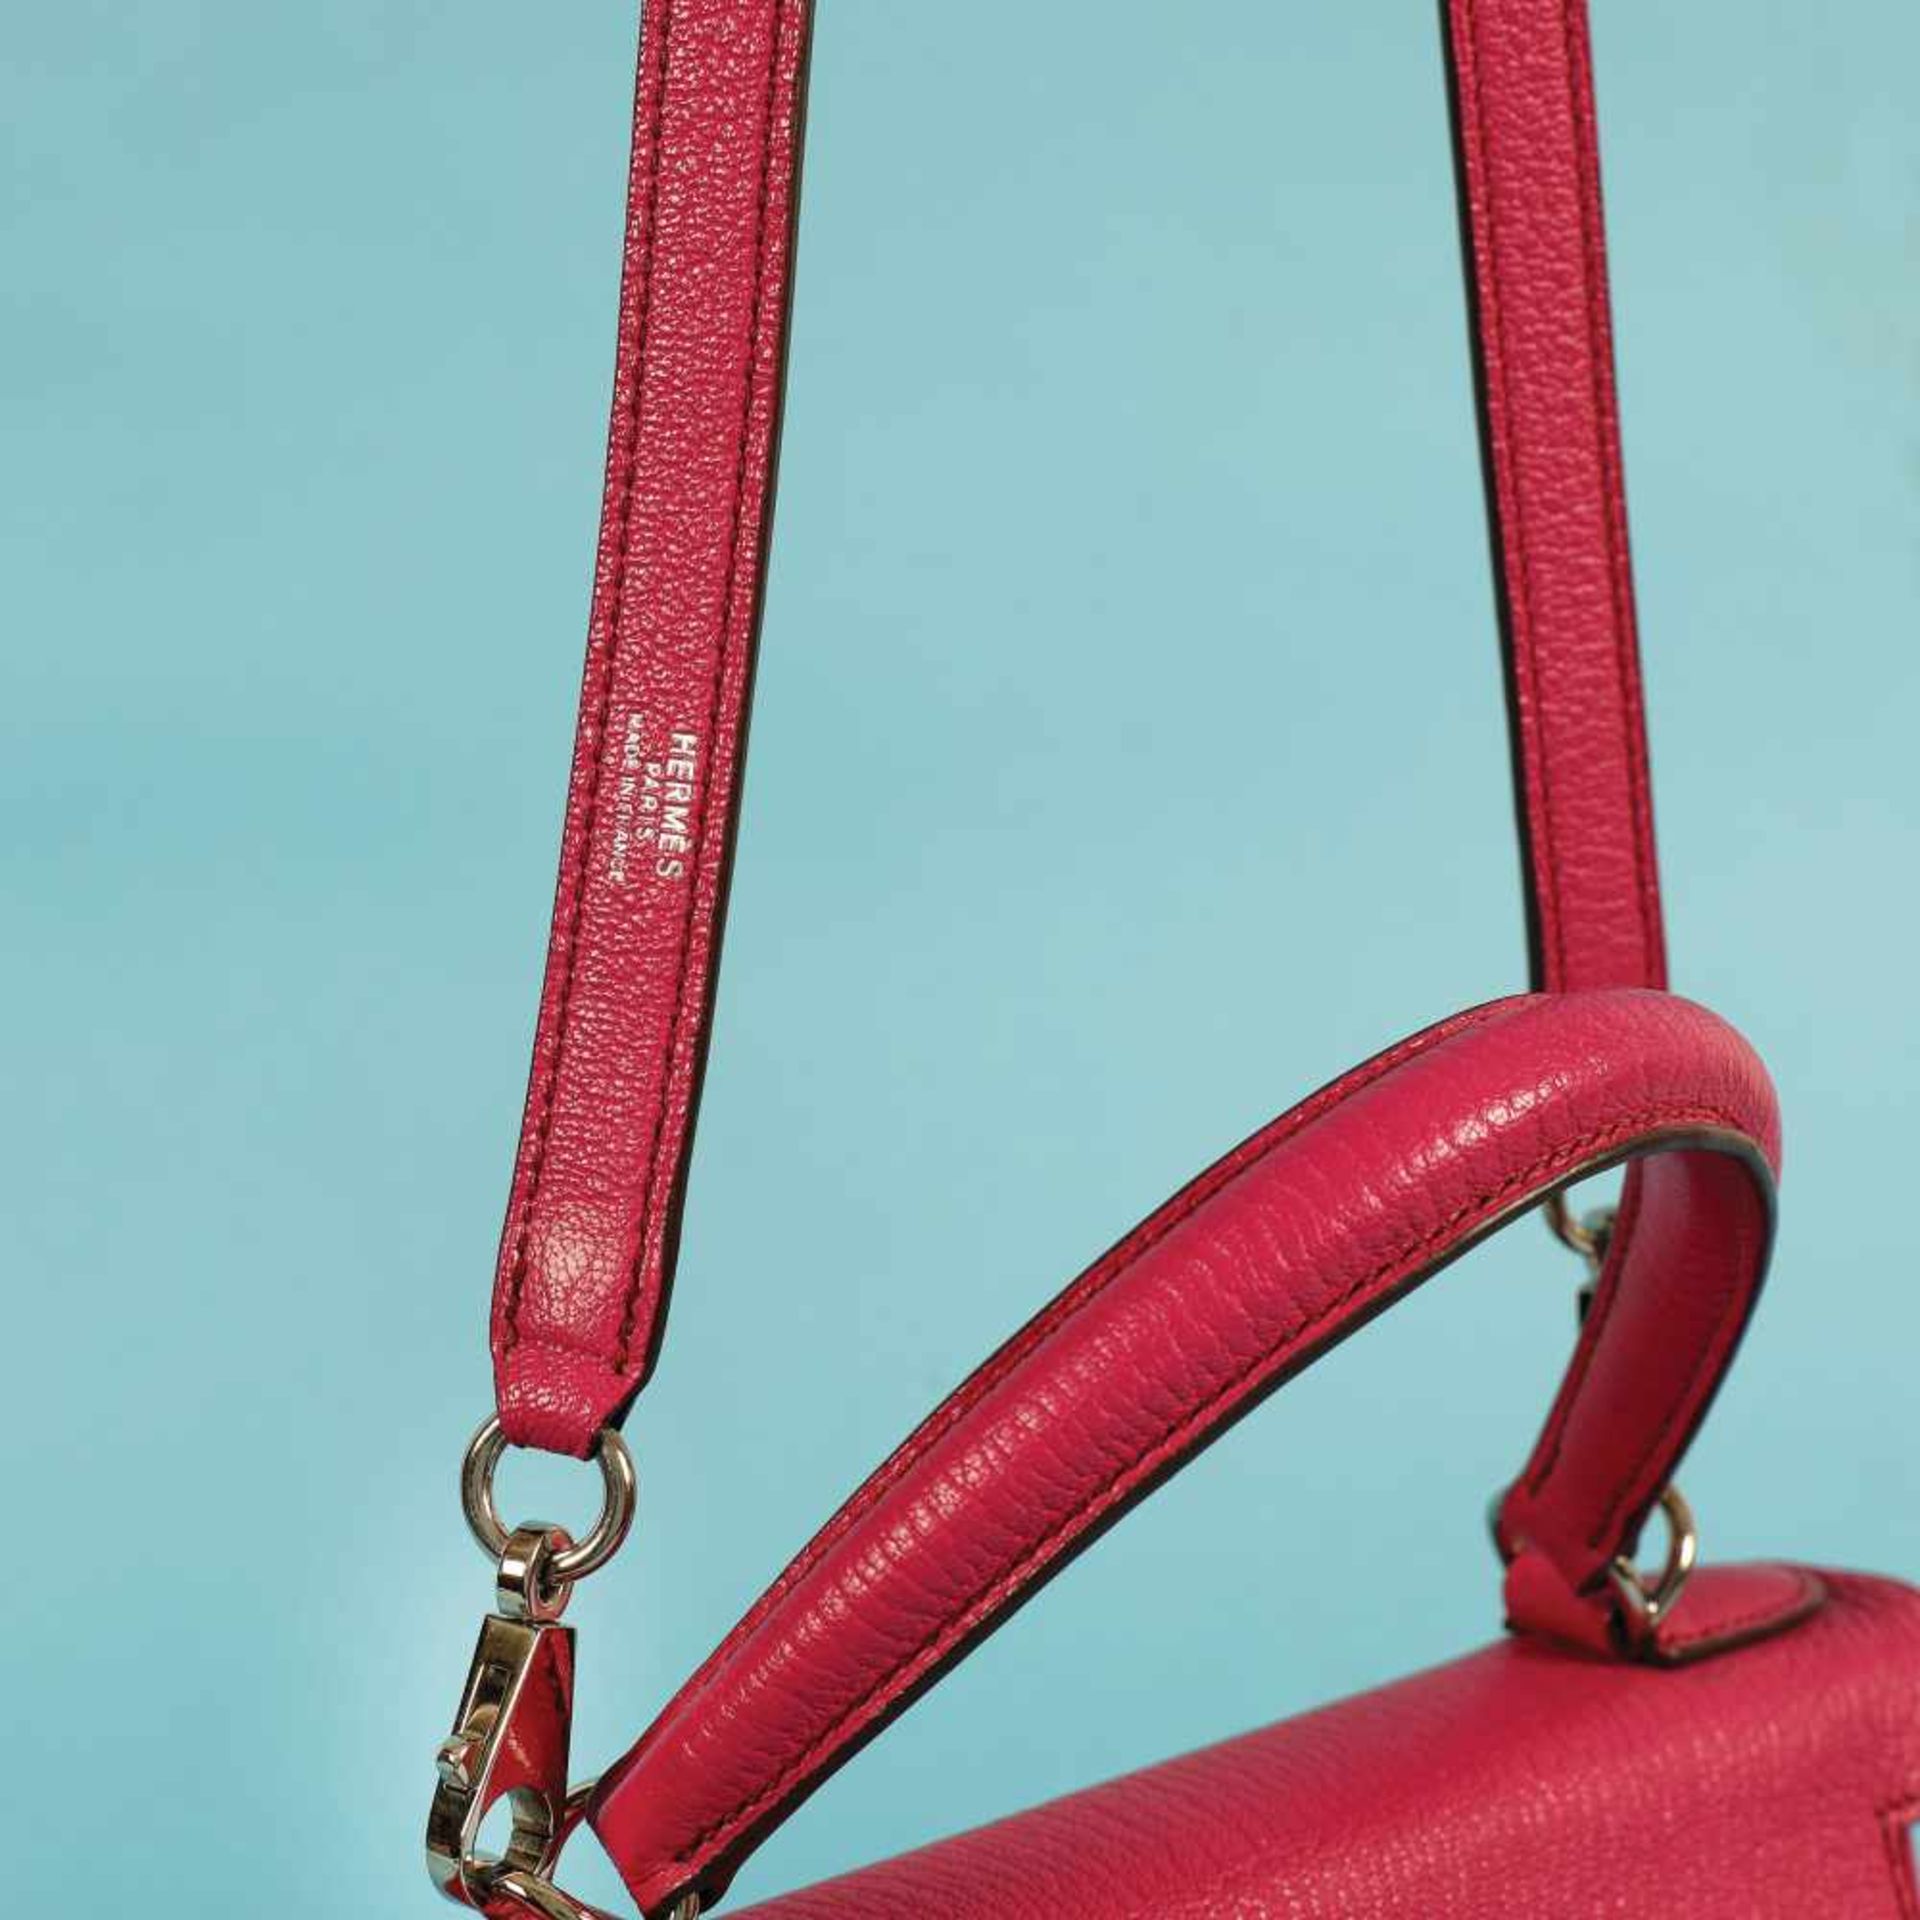 "Kelly 28" - Hermès bag, Chèvre leather, fuchsia, for women - Image 2 of 8